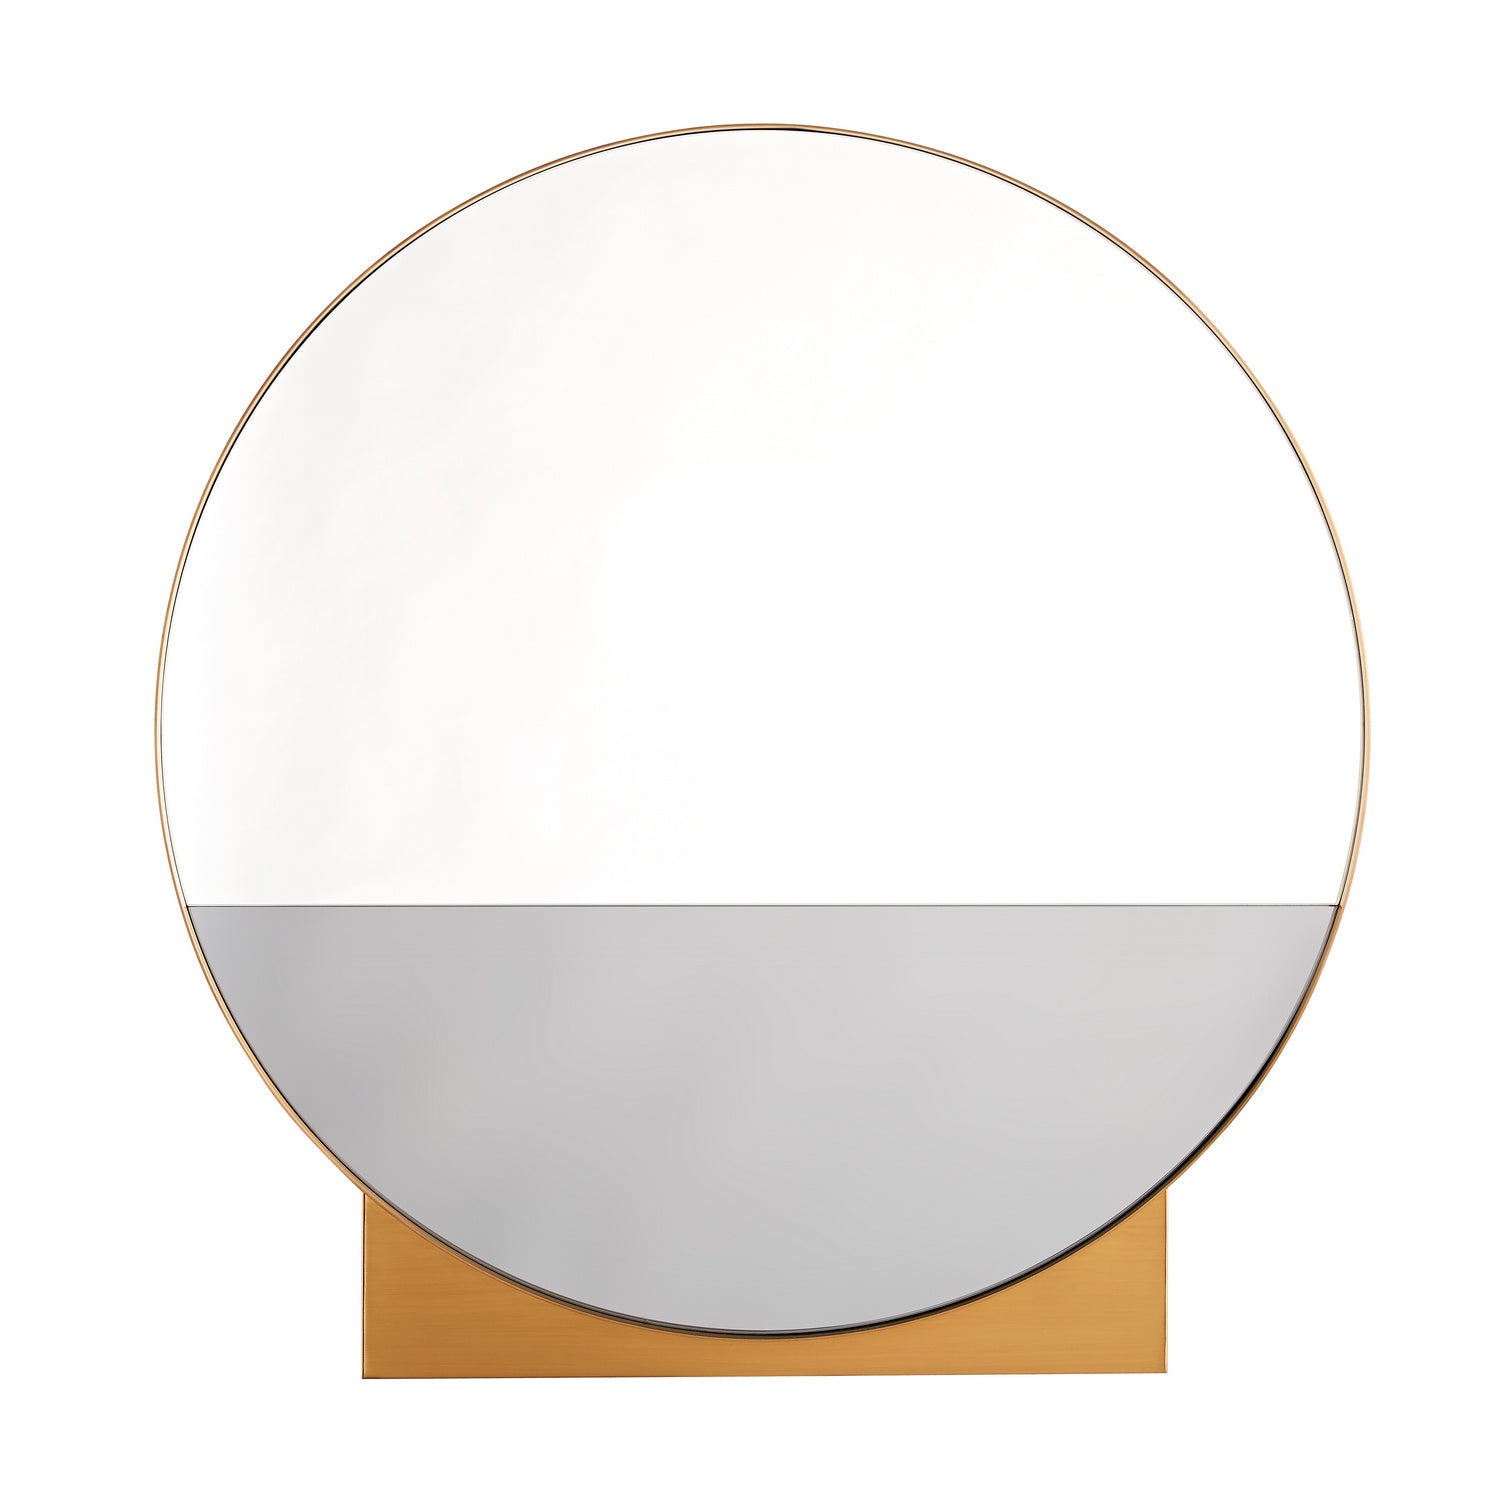 Mirror from the Datum collection in Antique Brass finish